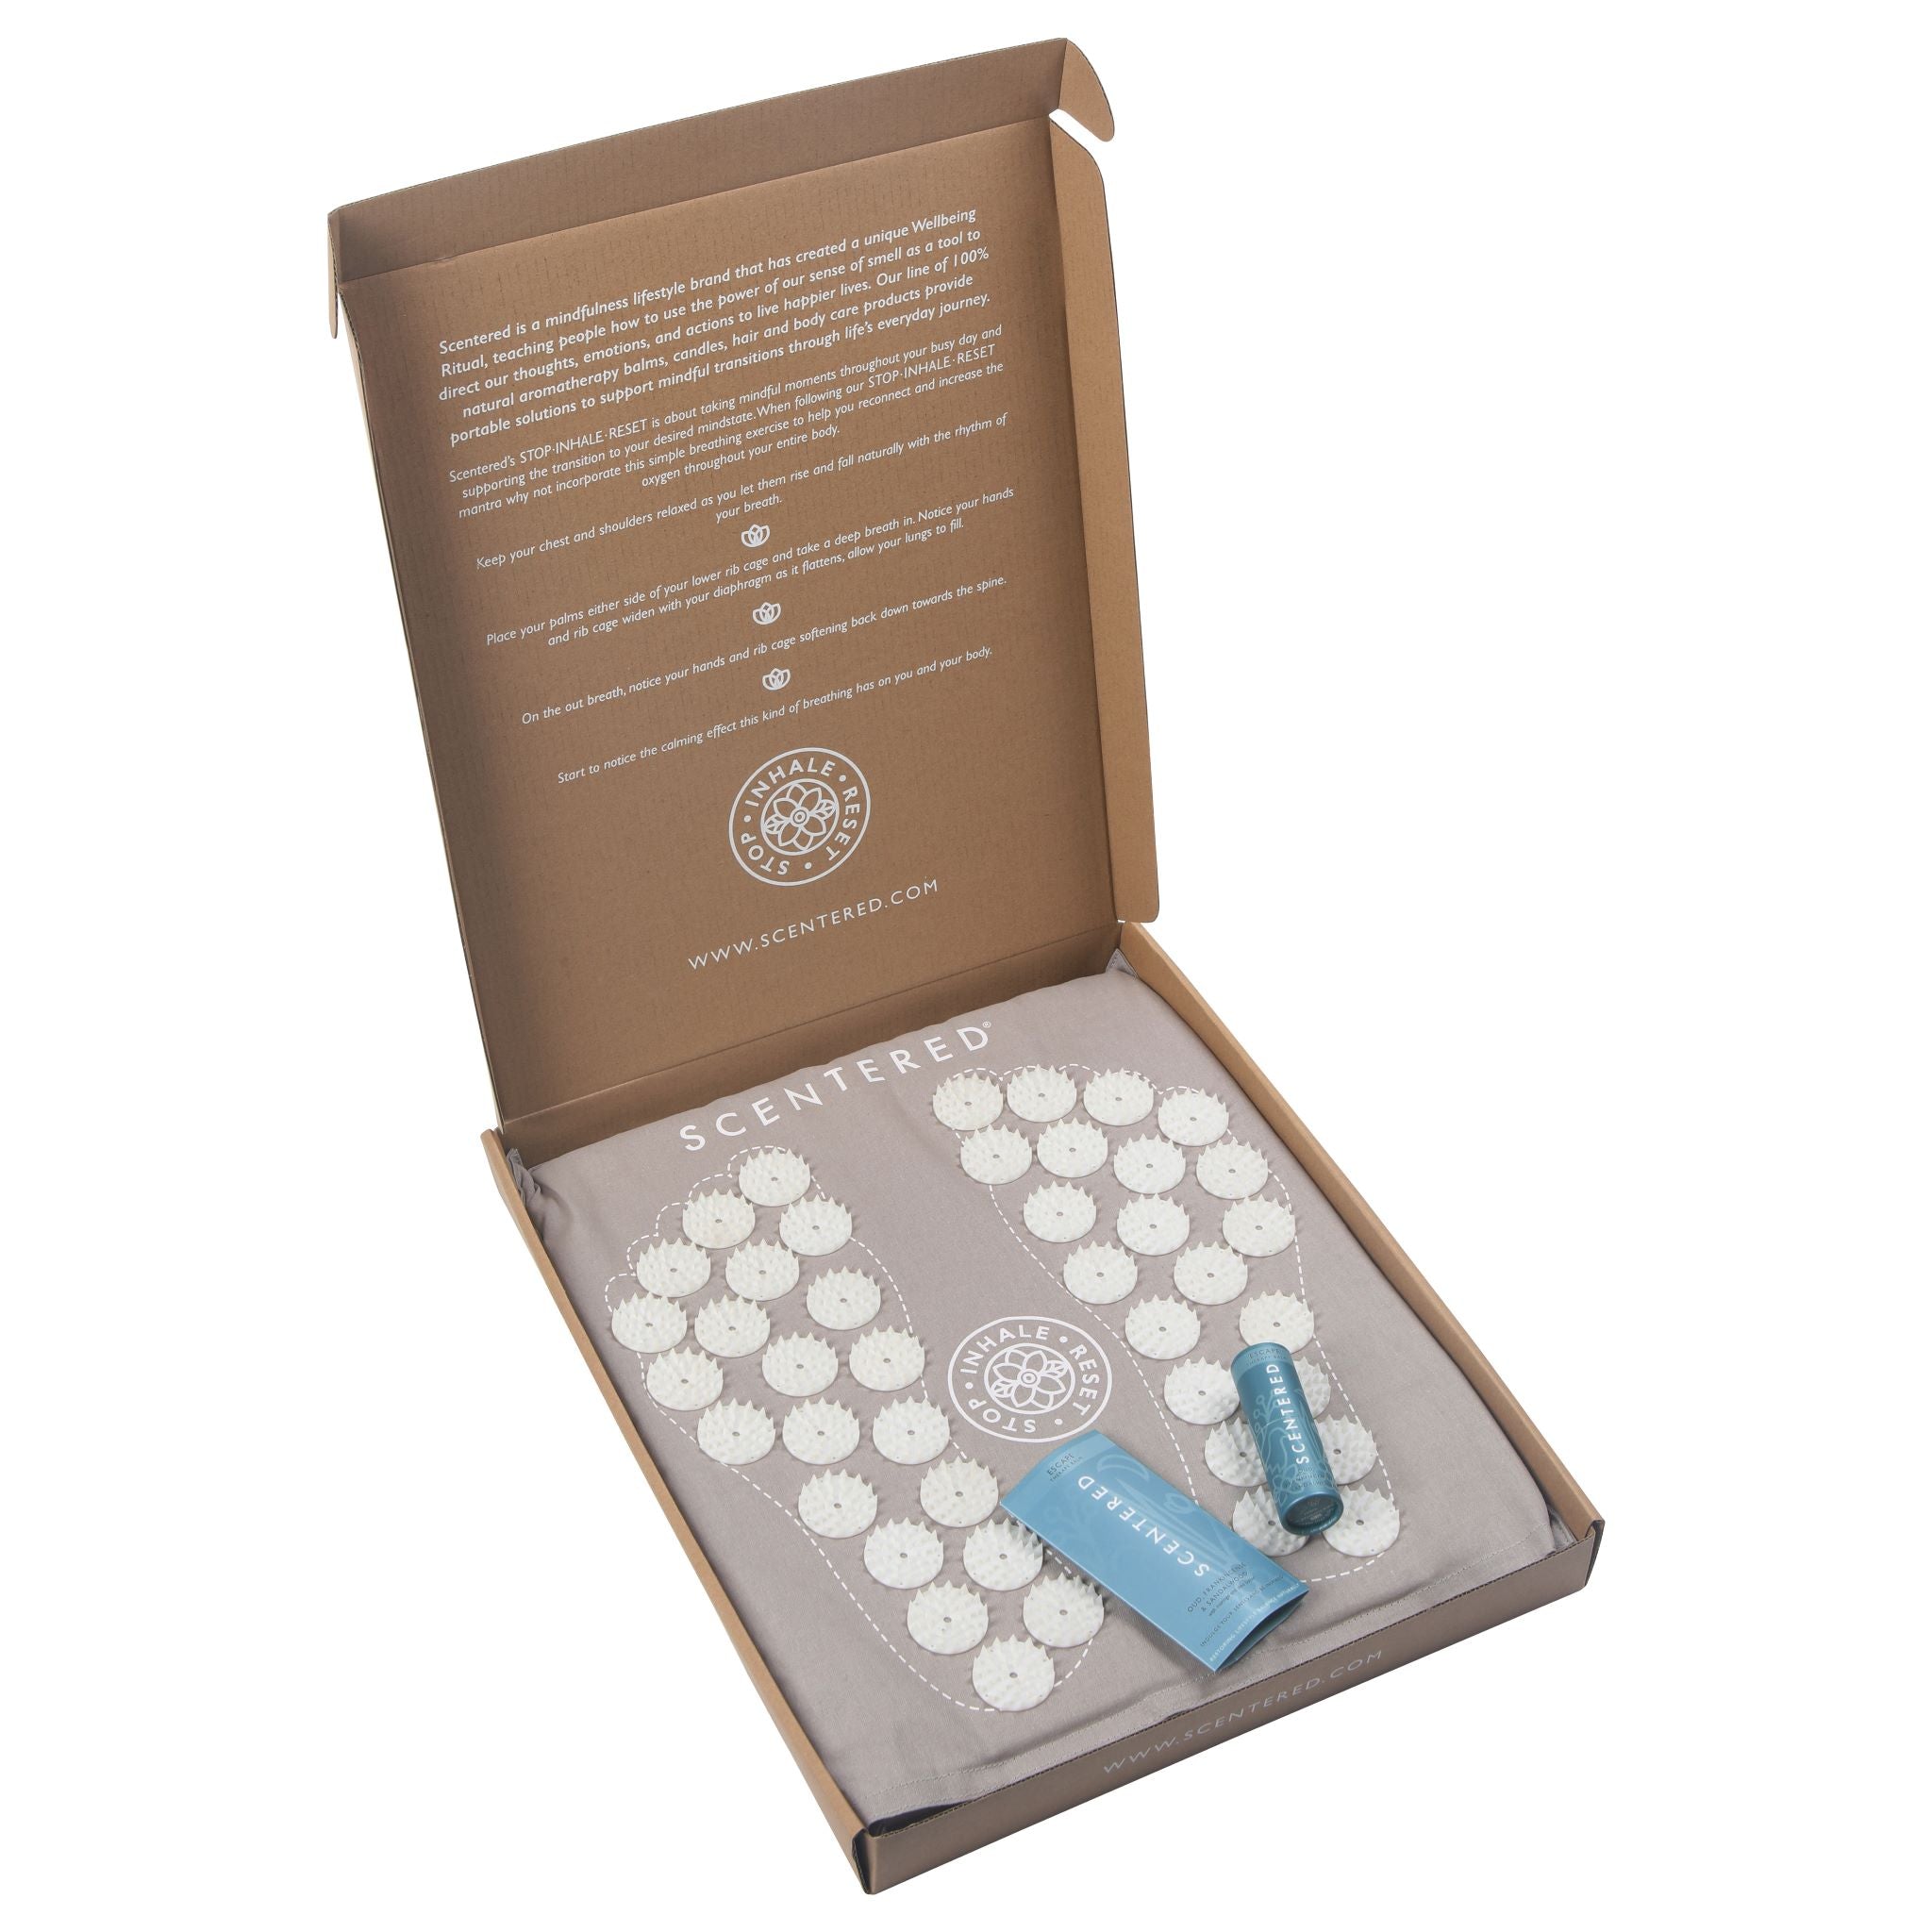 Scentered Acupressure Foot Mat in a cardboard box on a white back ground within the box contains a scentered escape balm included in the box